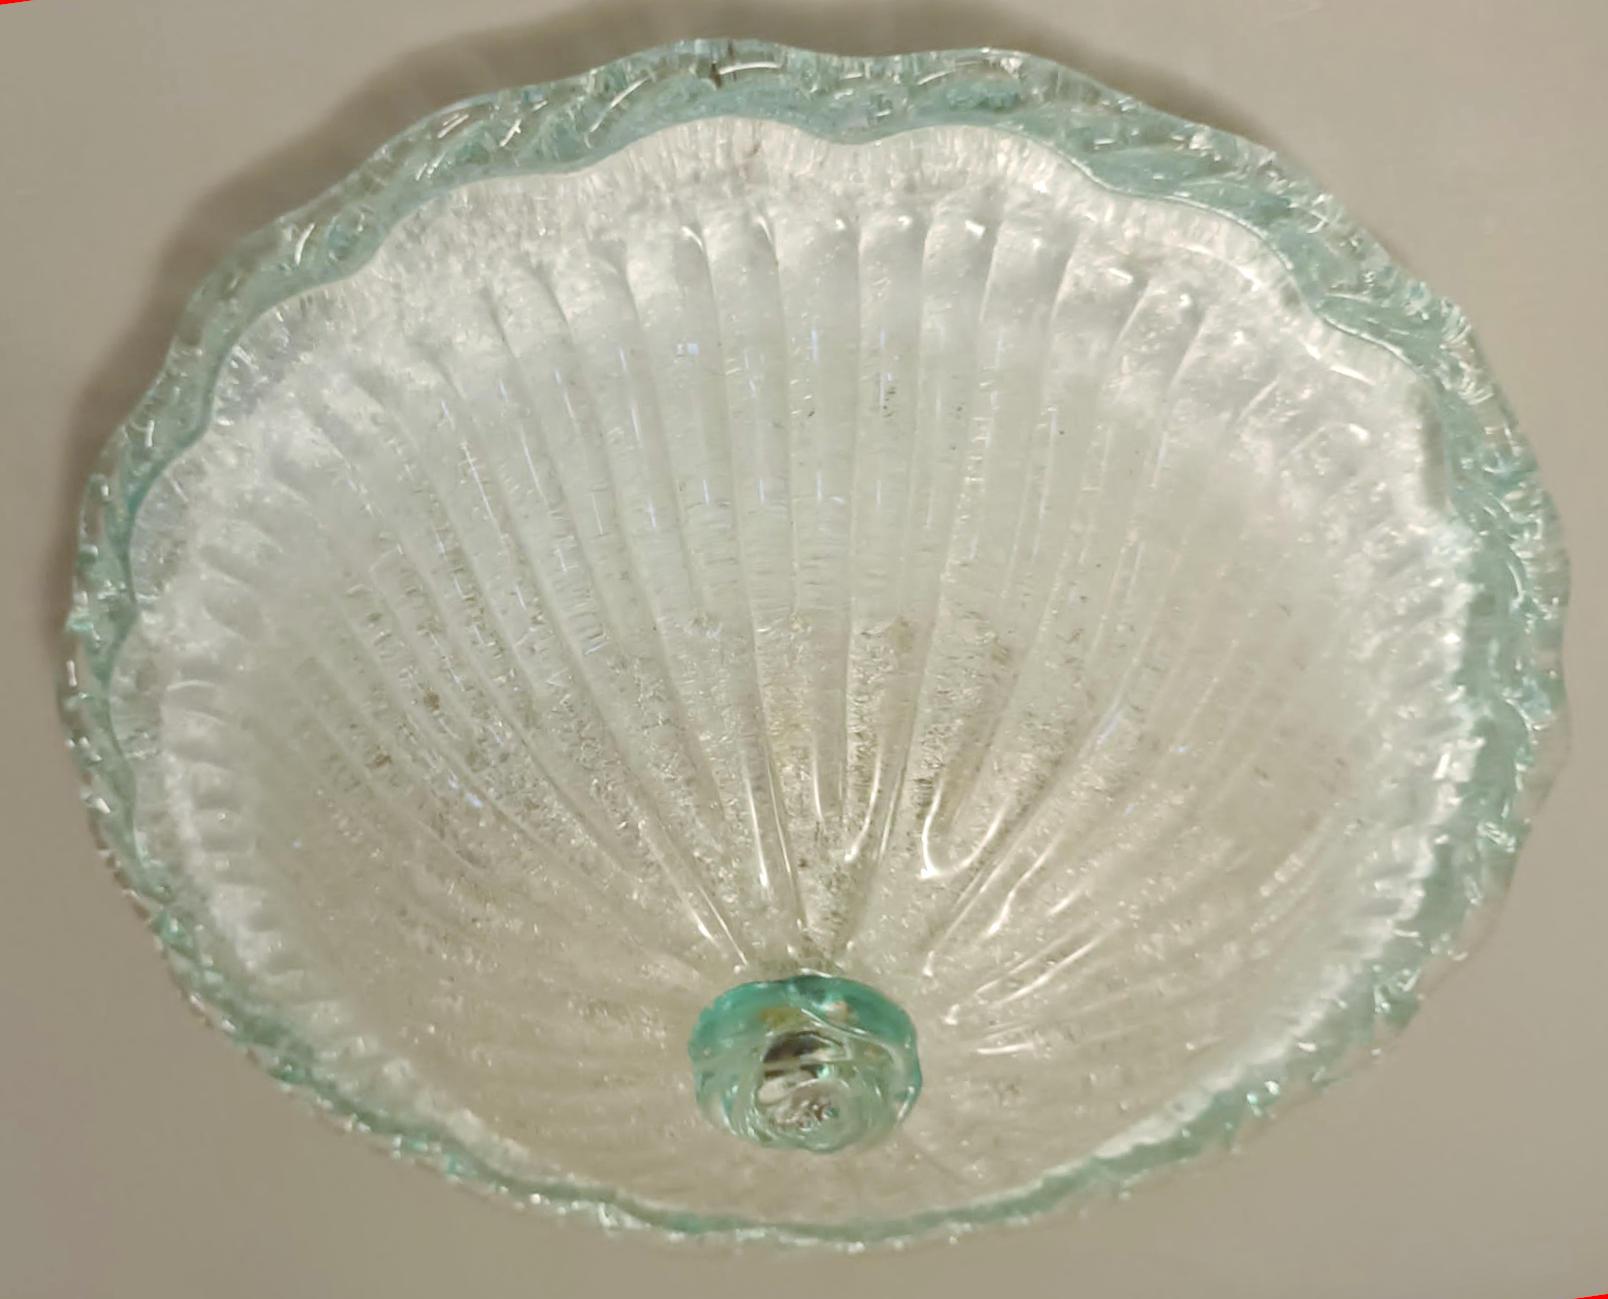 Vintage Italian flush mount with a single ribbed Murano glass shade hand blown with granular texture using Graniglia technique, decorated with green glass border and finial / Made in Italy circa 1960s
Measures: diameter 16 inches, height 6